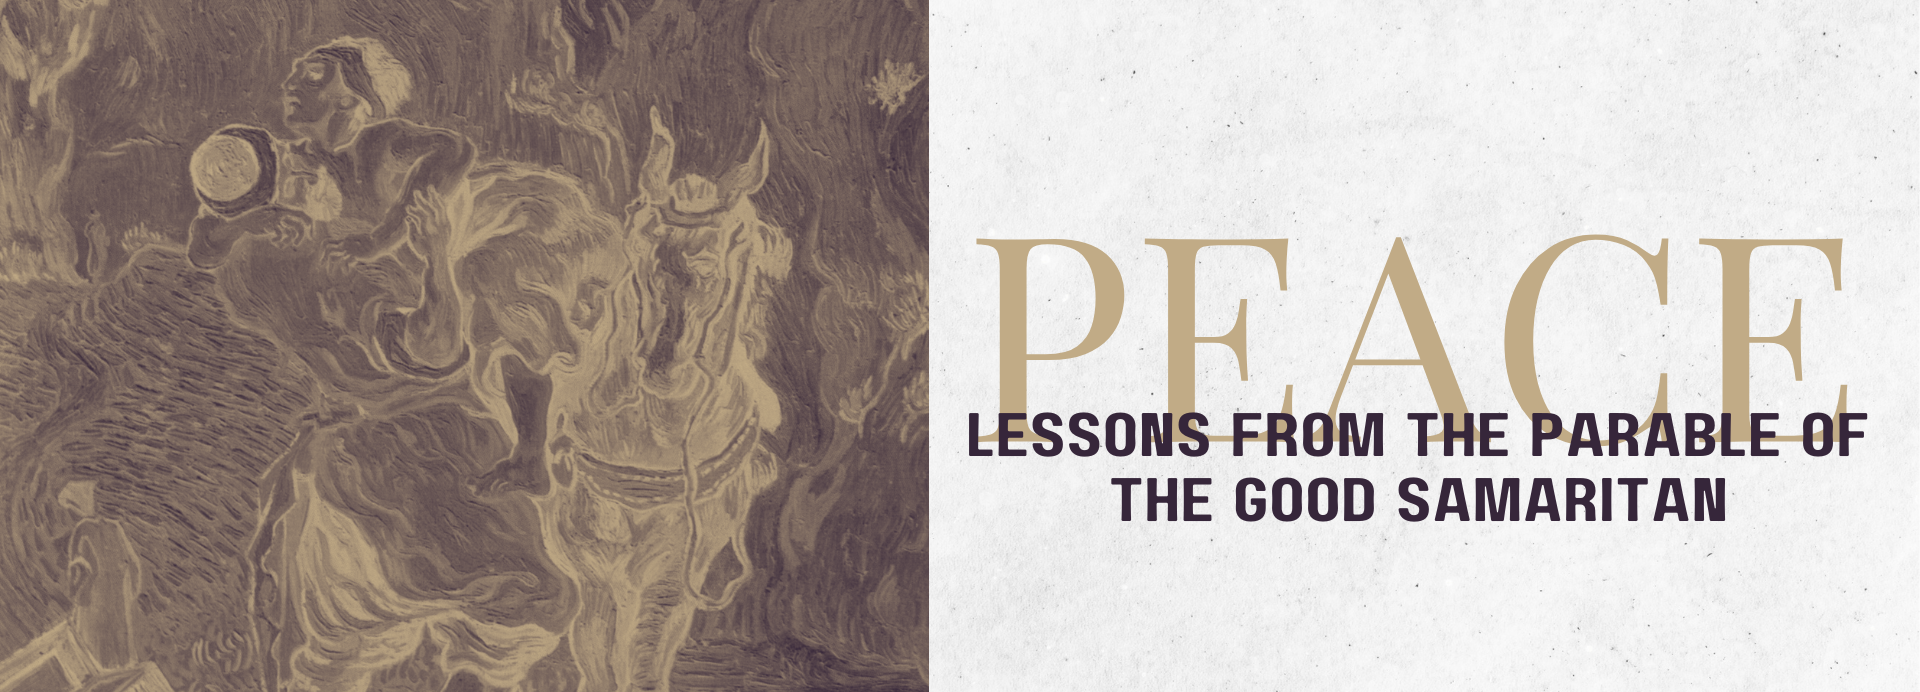 PEACE: Lessons From the Parable of The Good Samaritan